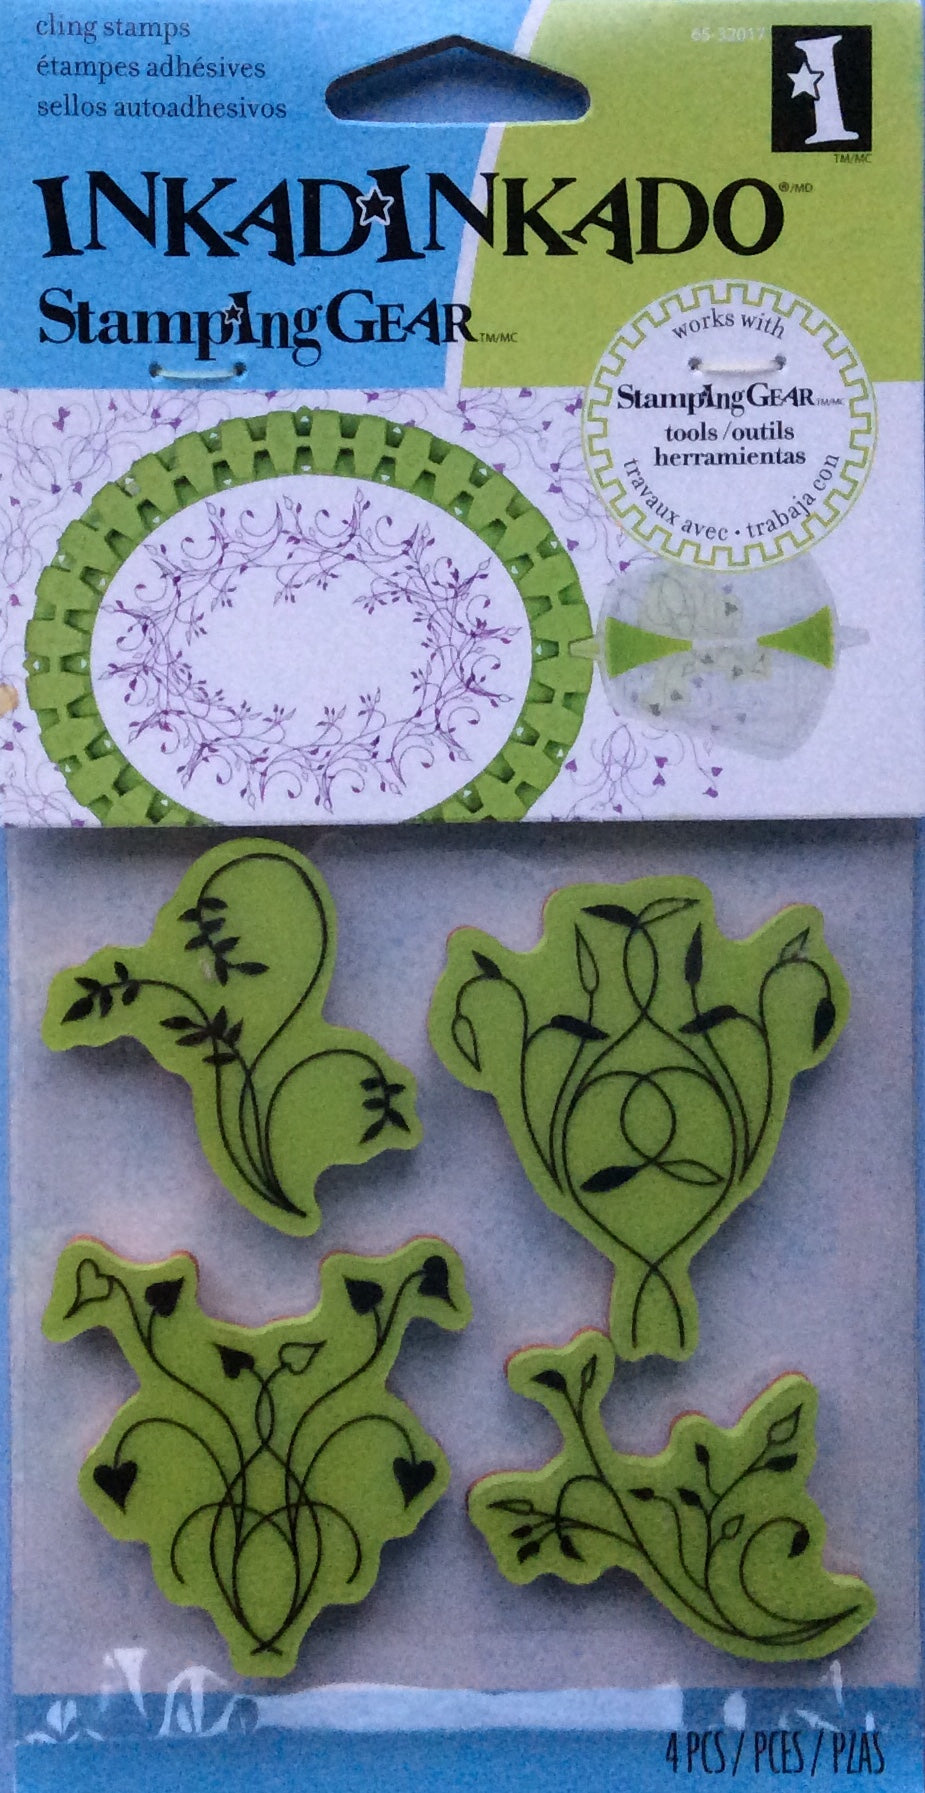 Cling Stamps - Inkadinkado Stamping Gear 4 Piece Rubber Stamp Set - Twisted Vines